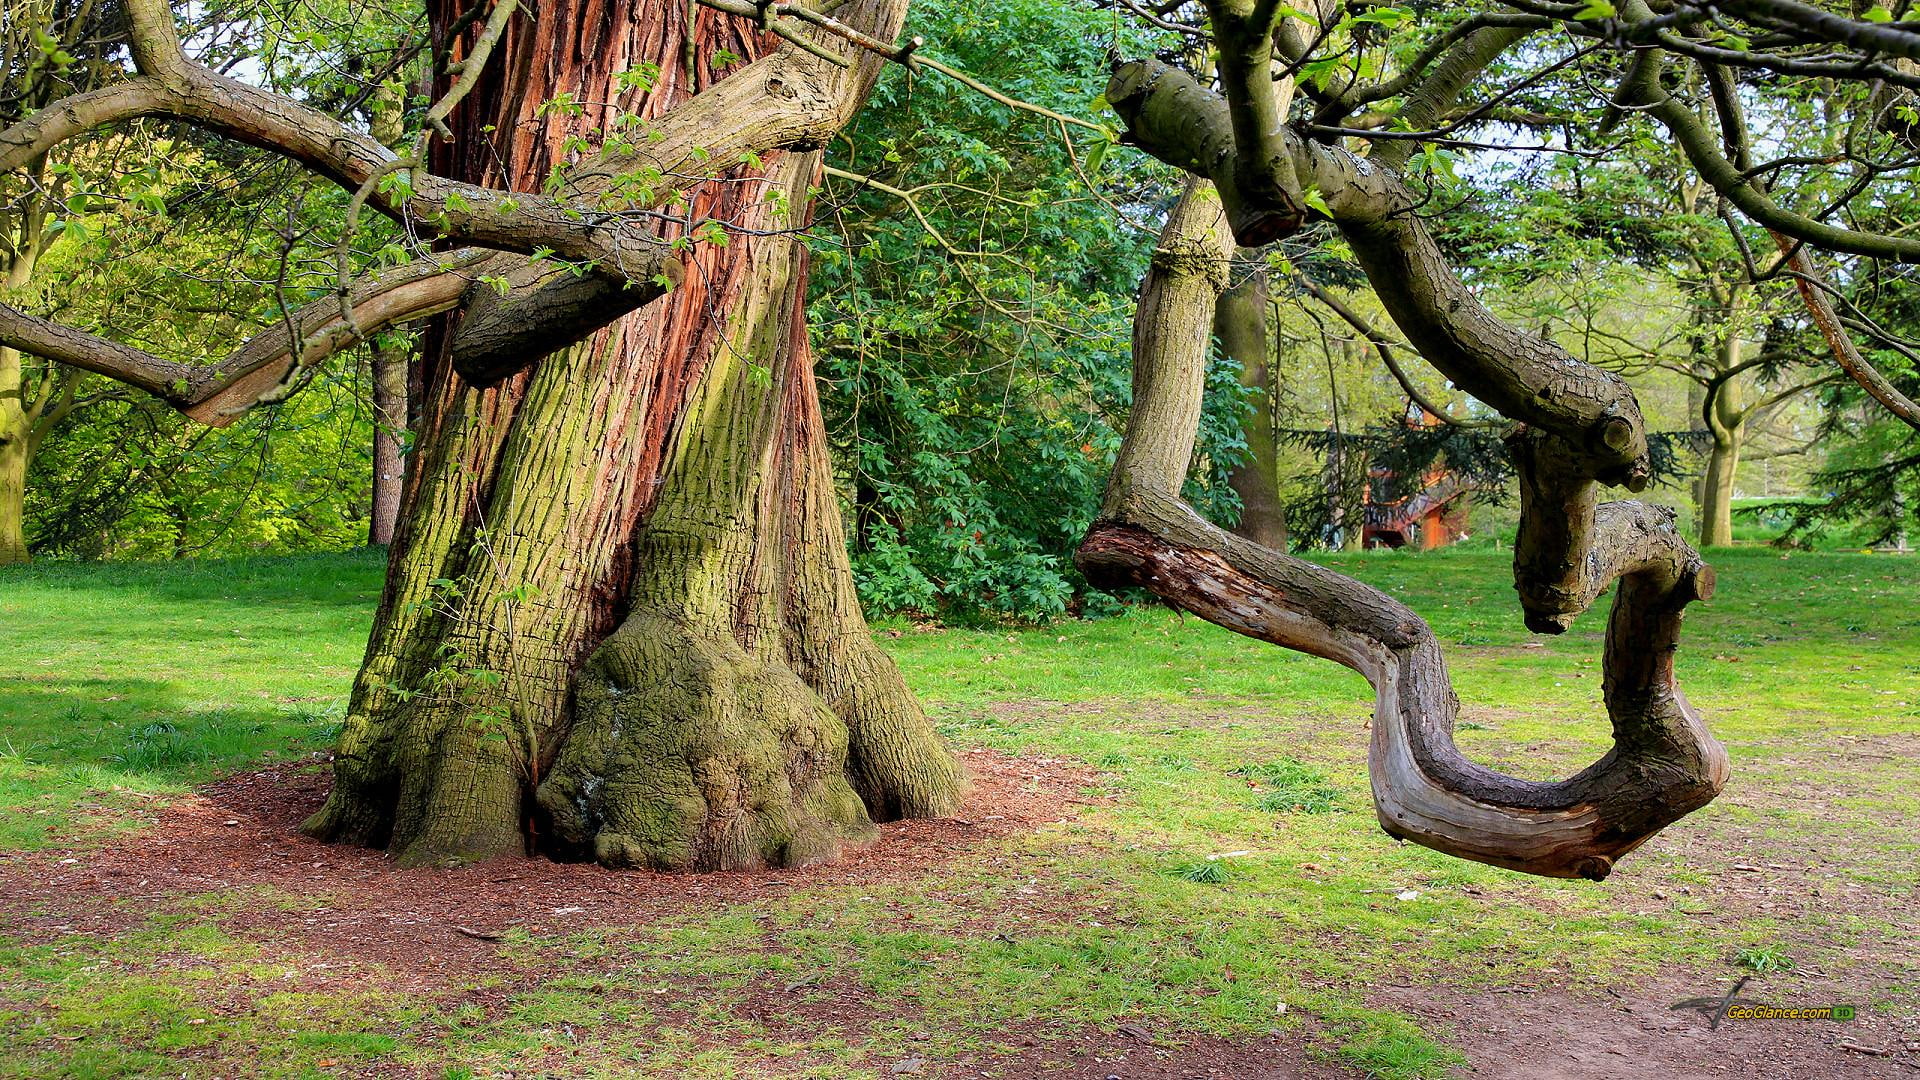 Sweet Chestnut Tree, gnarled brances, grass, moss, nature and landscapes